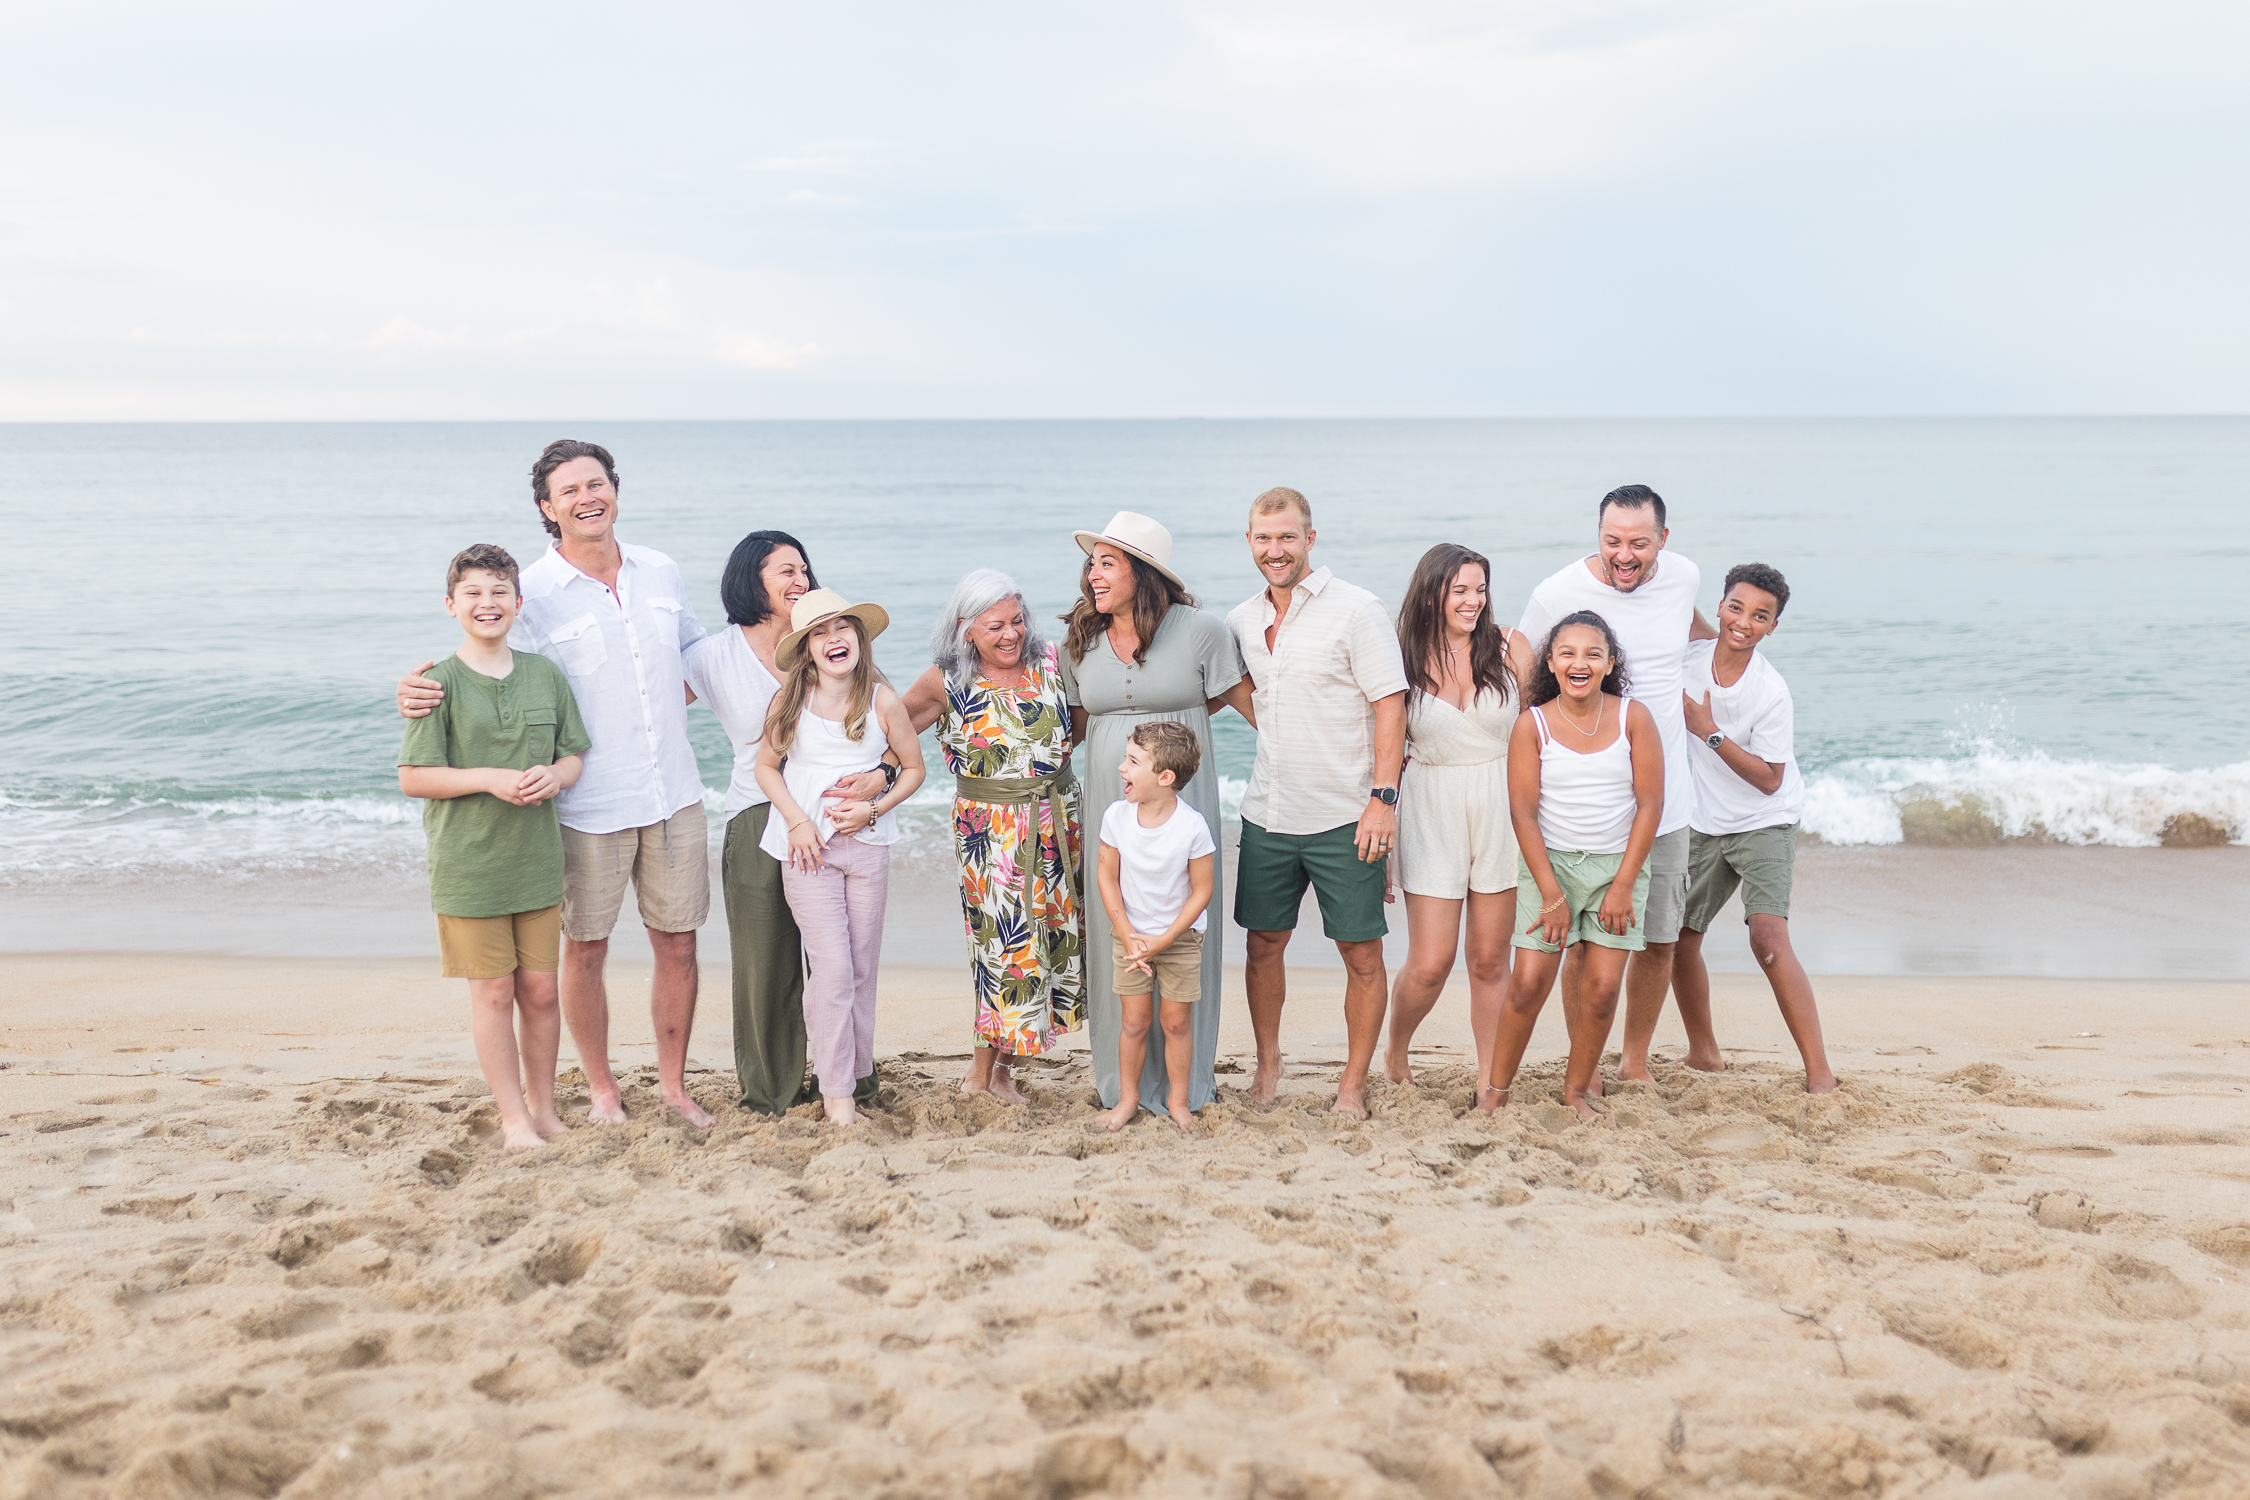 How to ruin your photo session - What not to do for your family photos